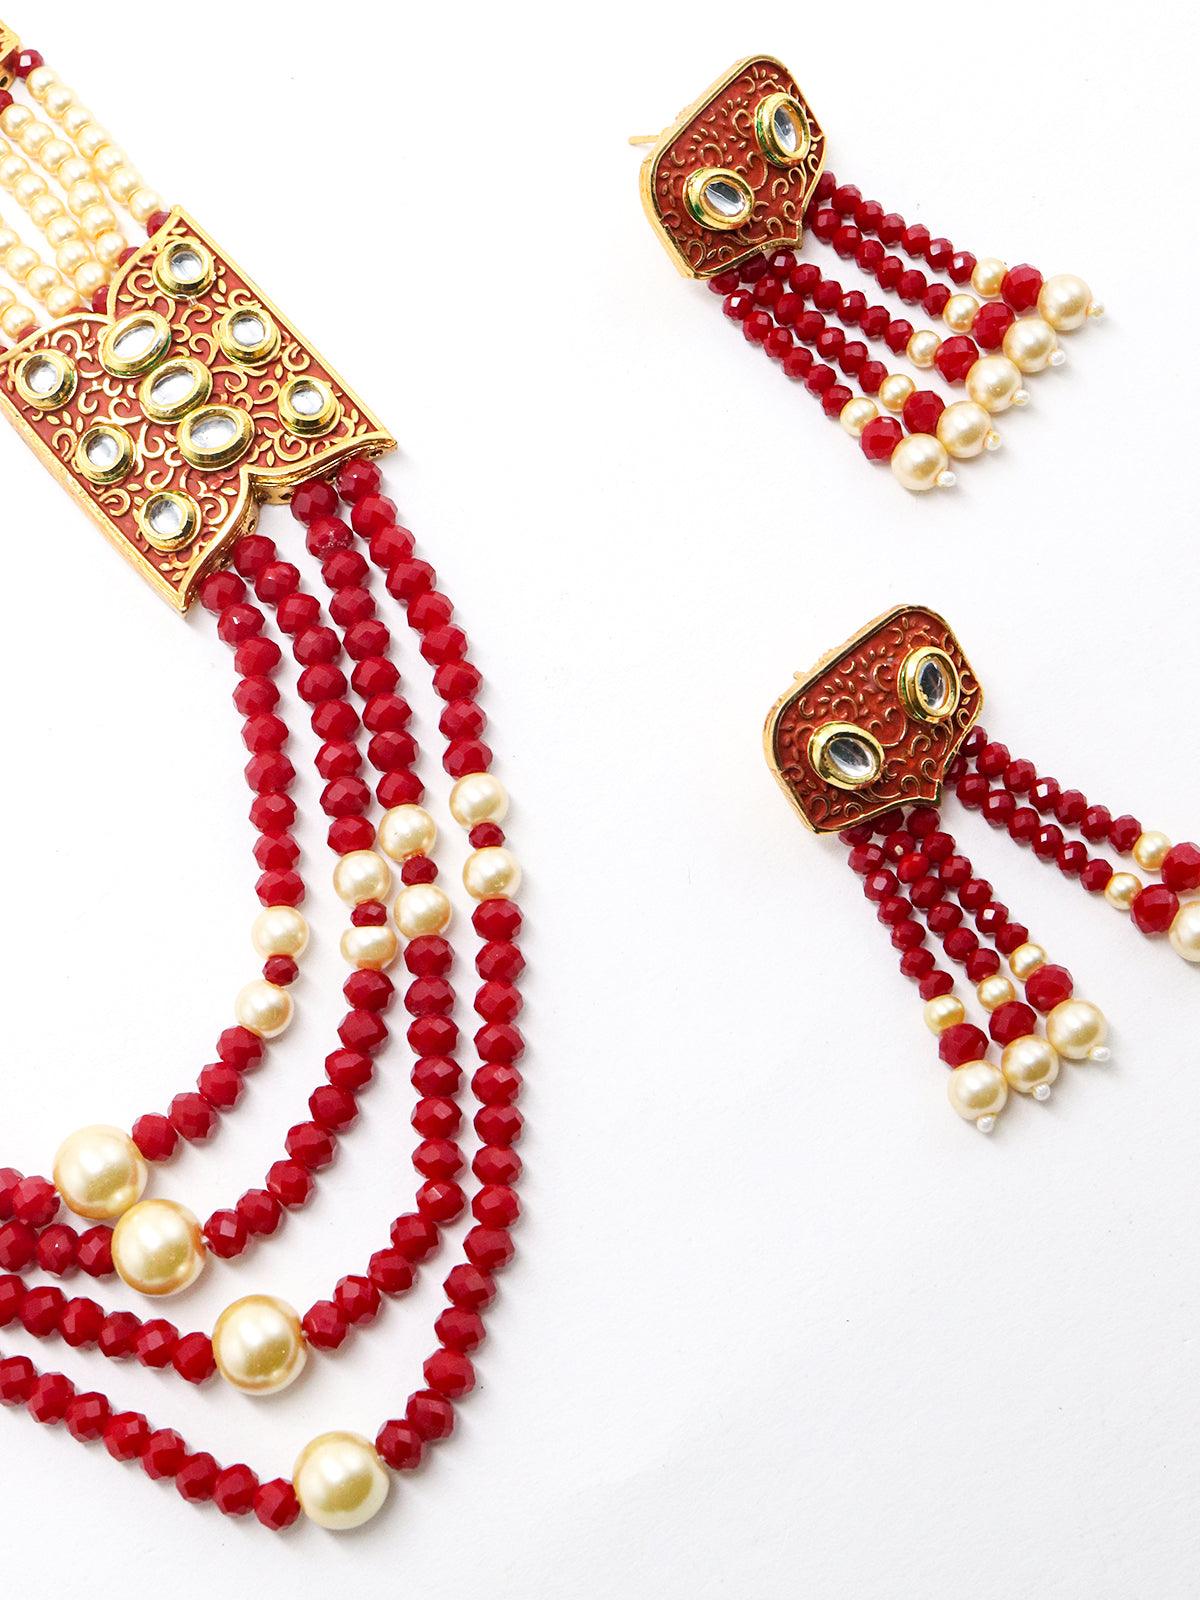 Red and typical pearl necklace with Earrings - Odette